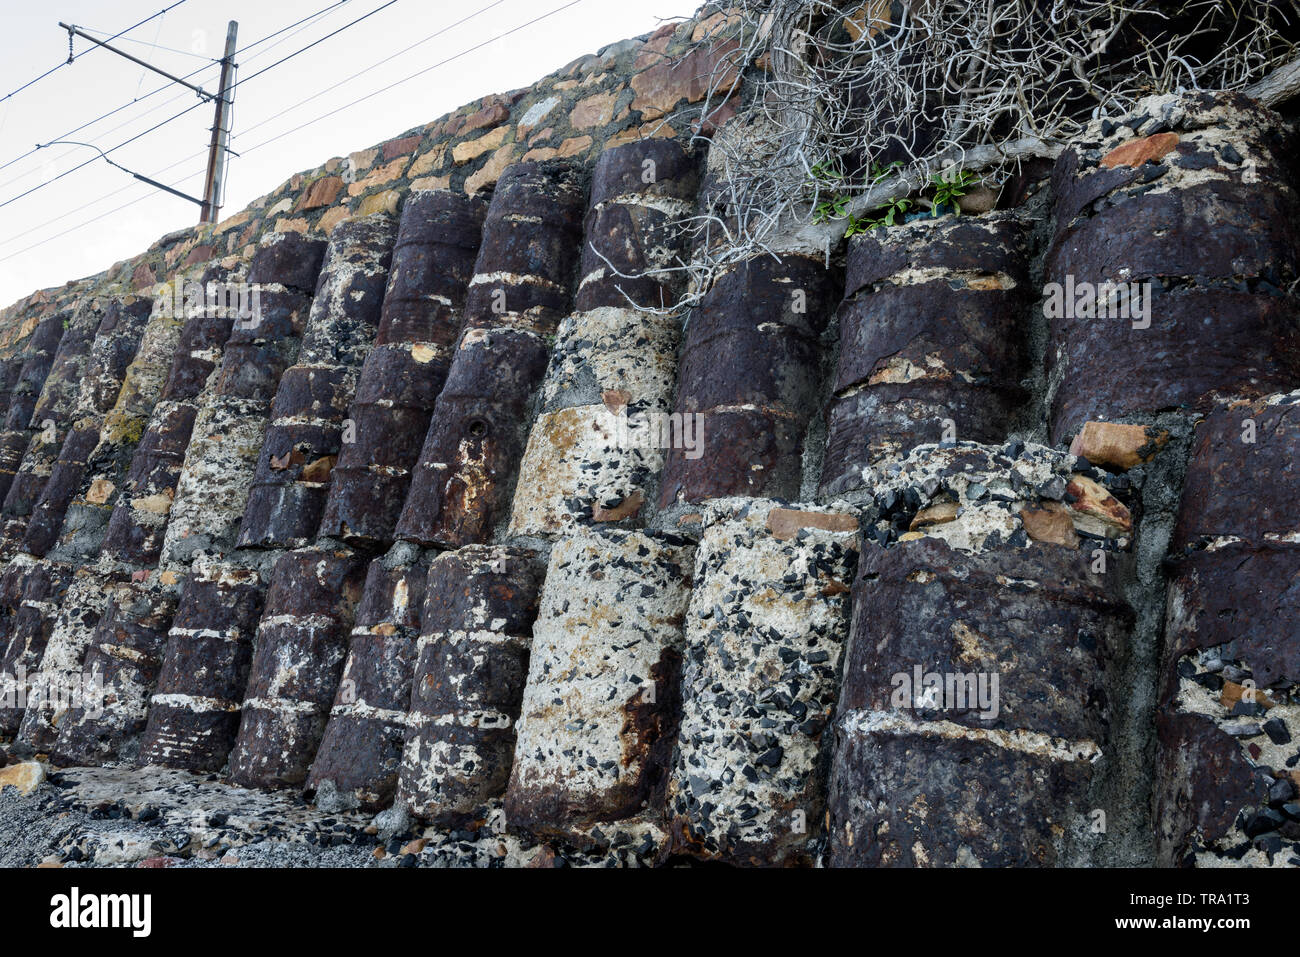 Oil drums filled with concrete act as a support structure on the Cape Peninsula coastal railway between Muizenberg and Simons Town in South Africa Stock Photo